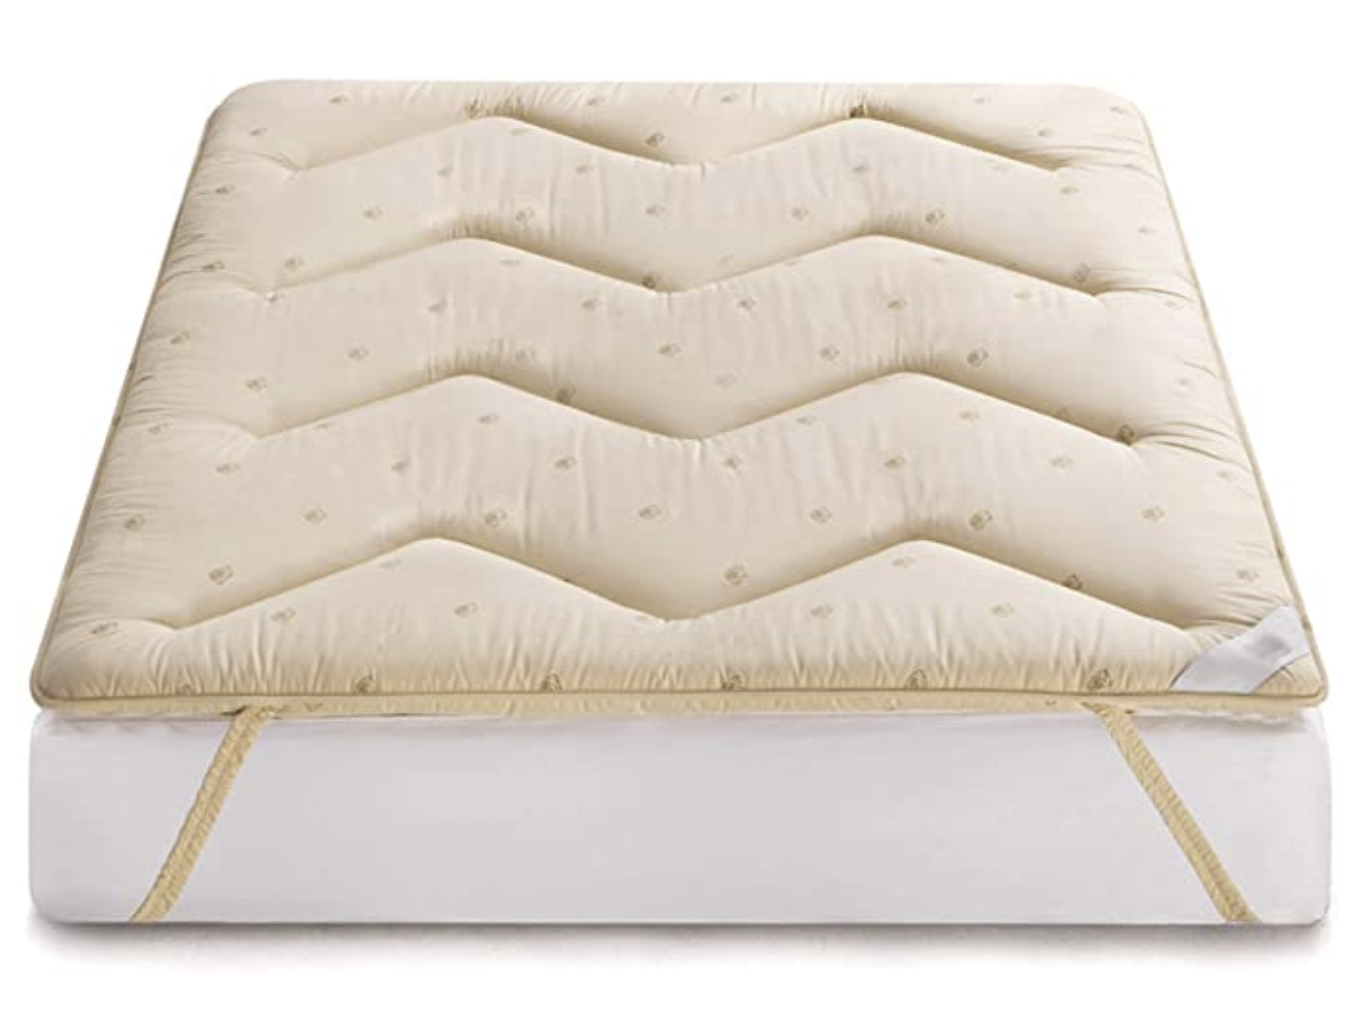 Frequency of replacing mattress toppers depends on material and use.